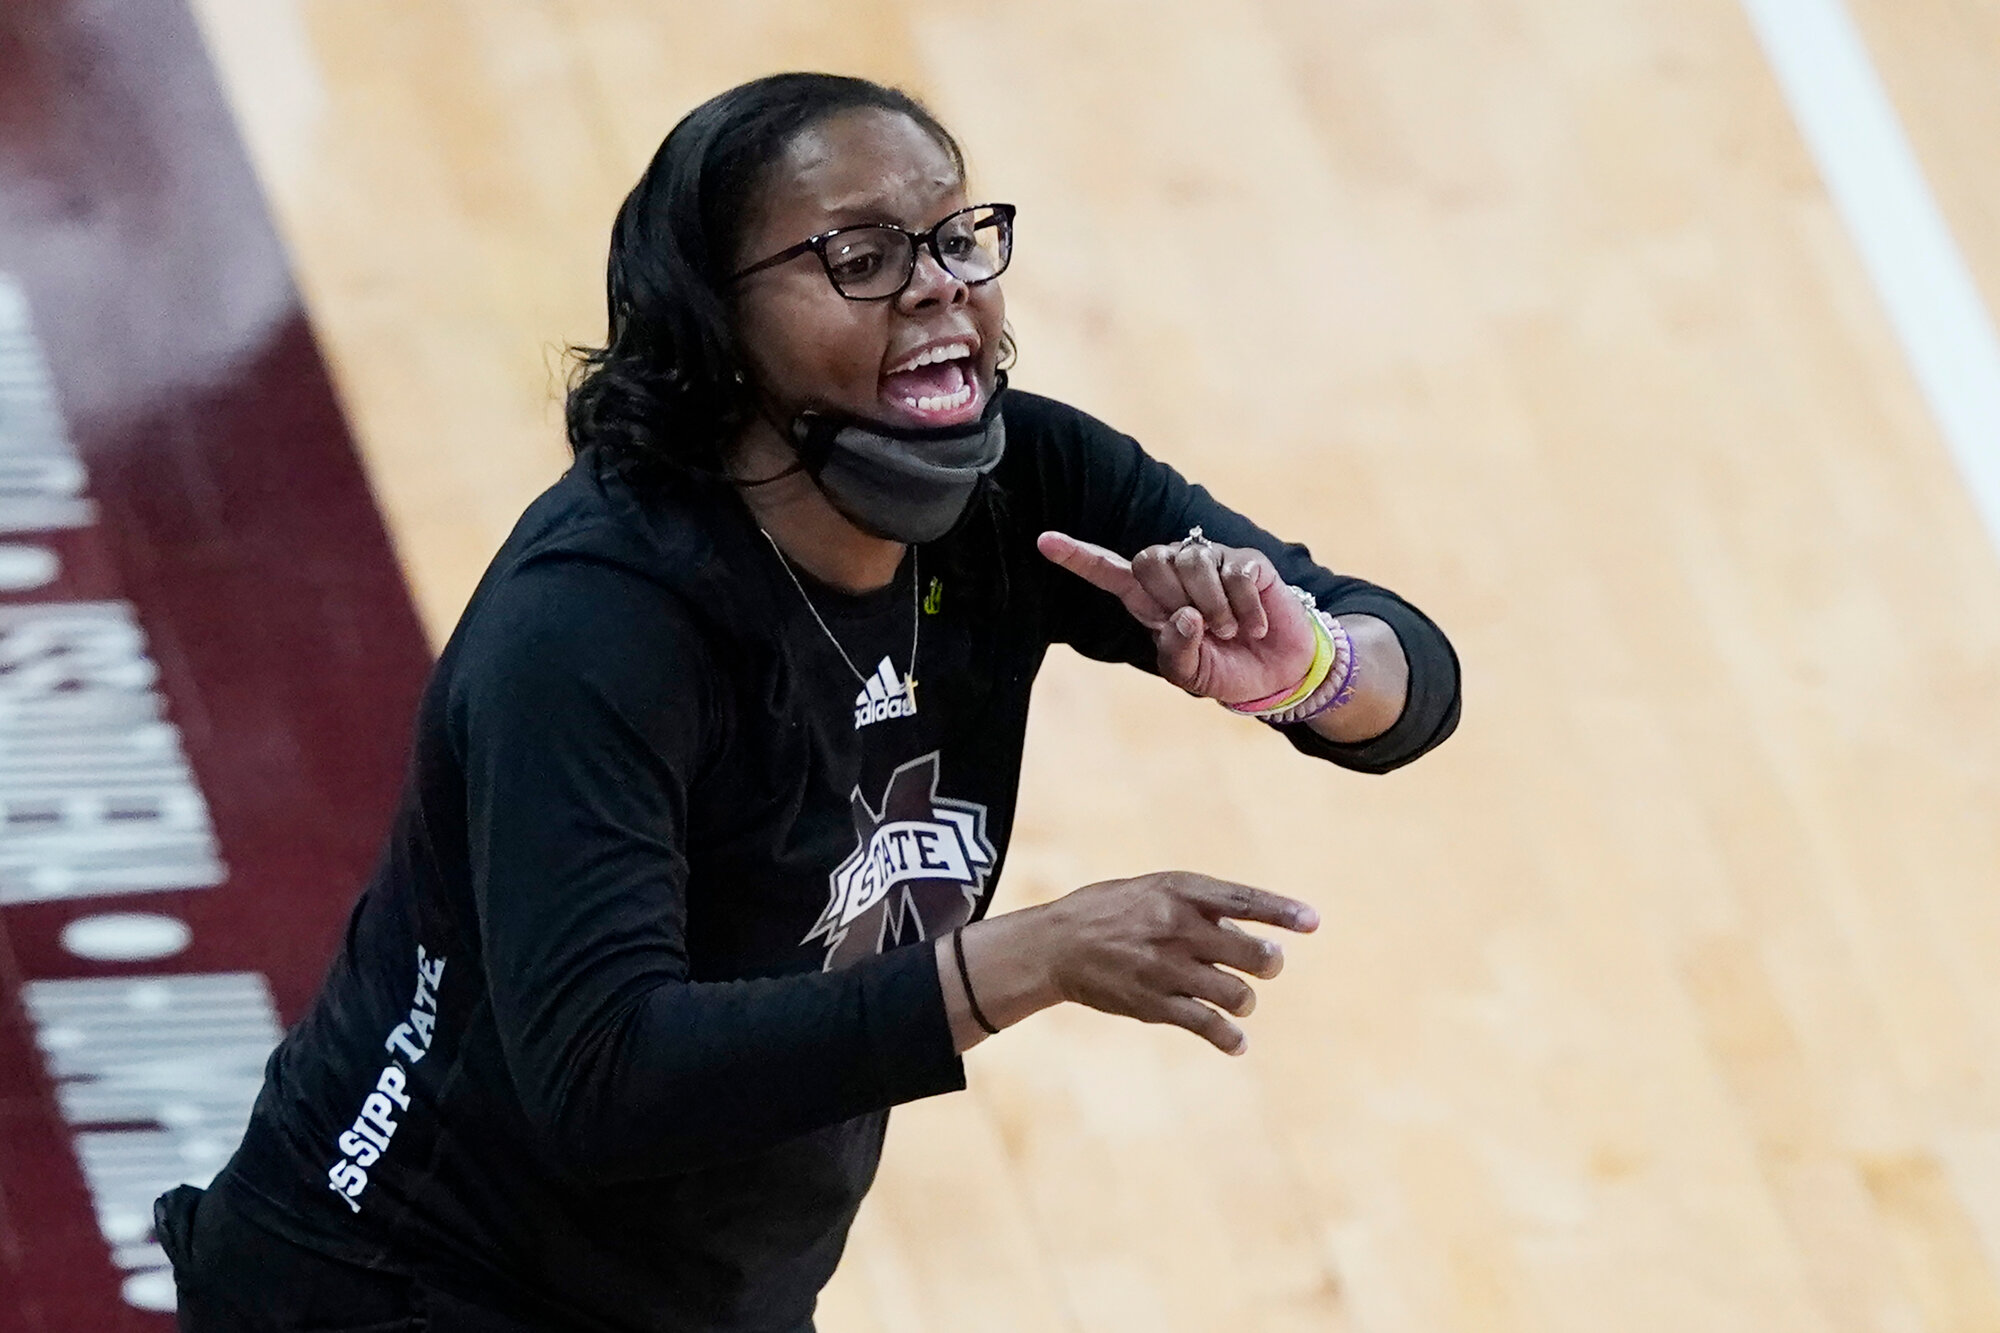 South Carolina women's basketball will host Rutgers in an exhibition game on Oct. 22 to honor the late player and coach Nikki McCray-Penson, seen here coaching at Mississippi. She also served as an assistant on the coaching staffs at both schools.